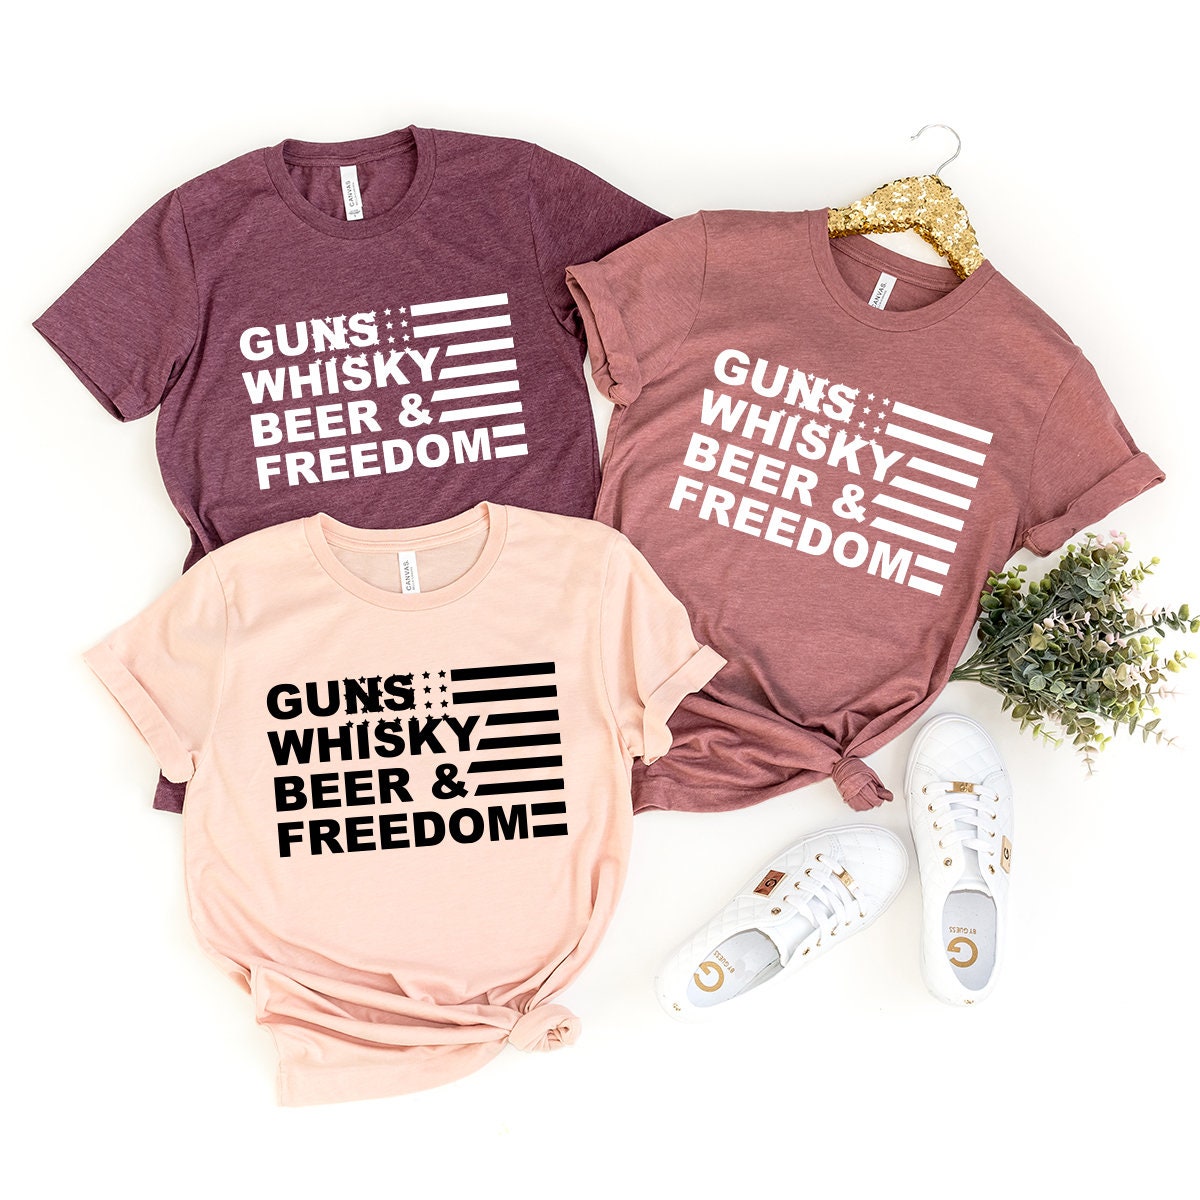 Gun Whisky Beer And Freedom With America Flag Shirt, Guns Lover Shirt, Whisky Lover Tee, Beer Lover Shirt, Freedom Shirt, American Flag Tee - Fastdeliverytees.com